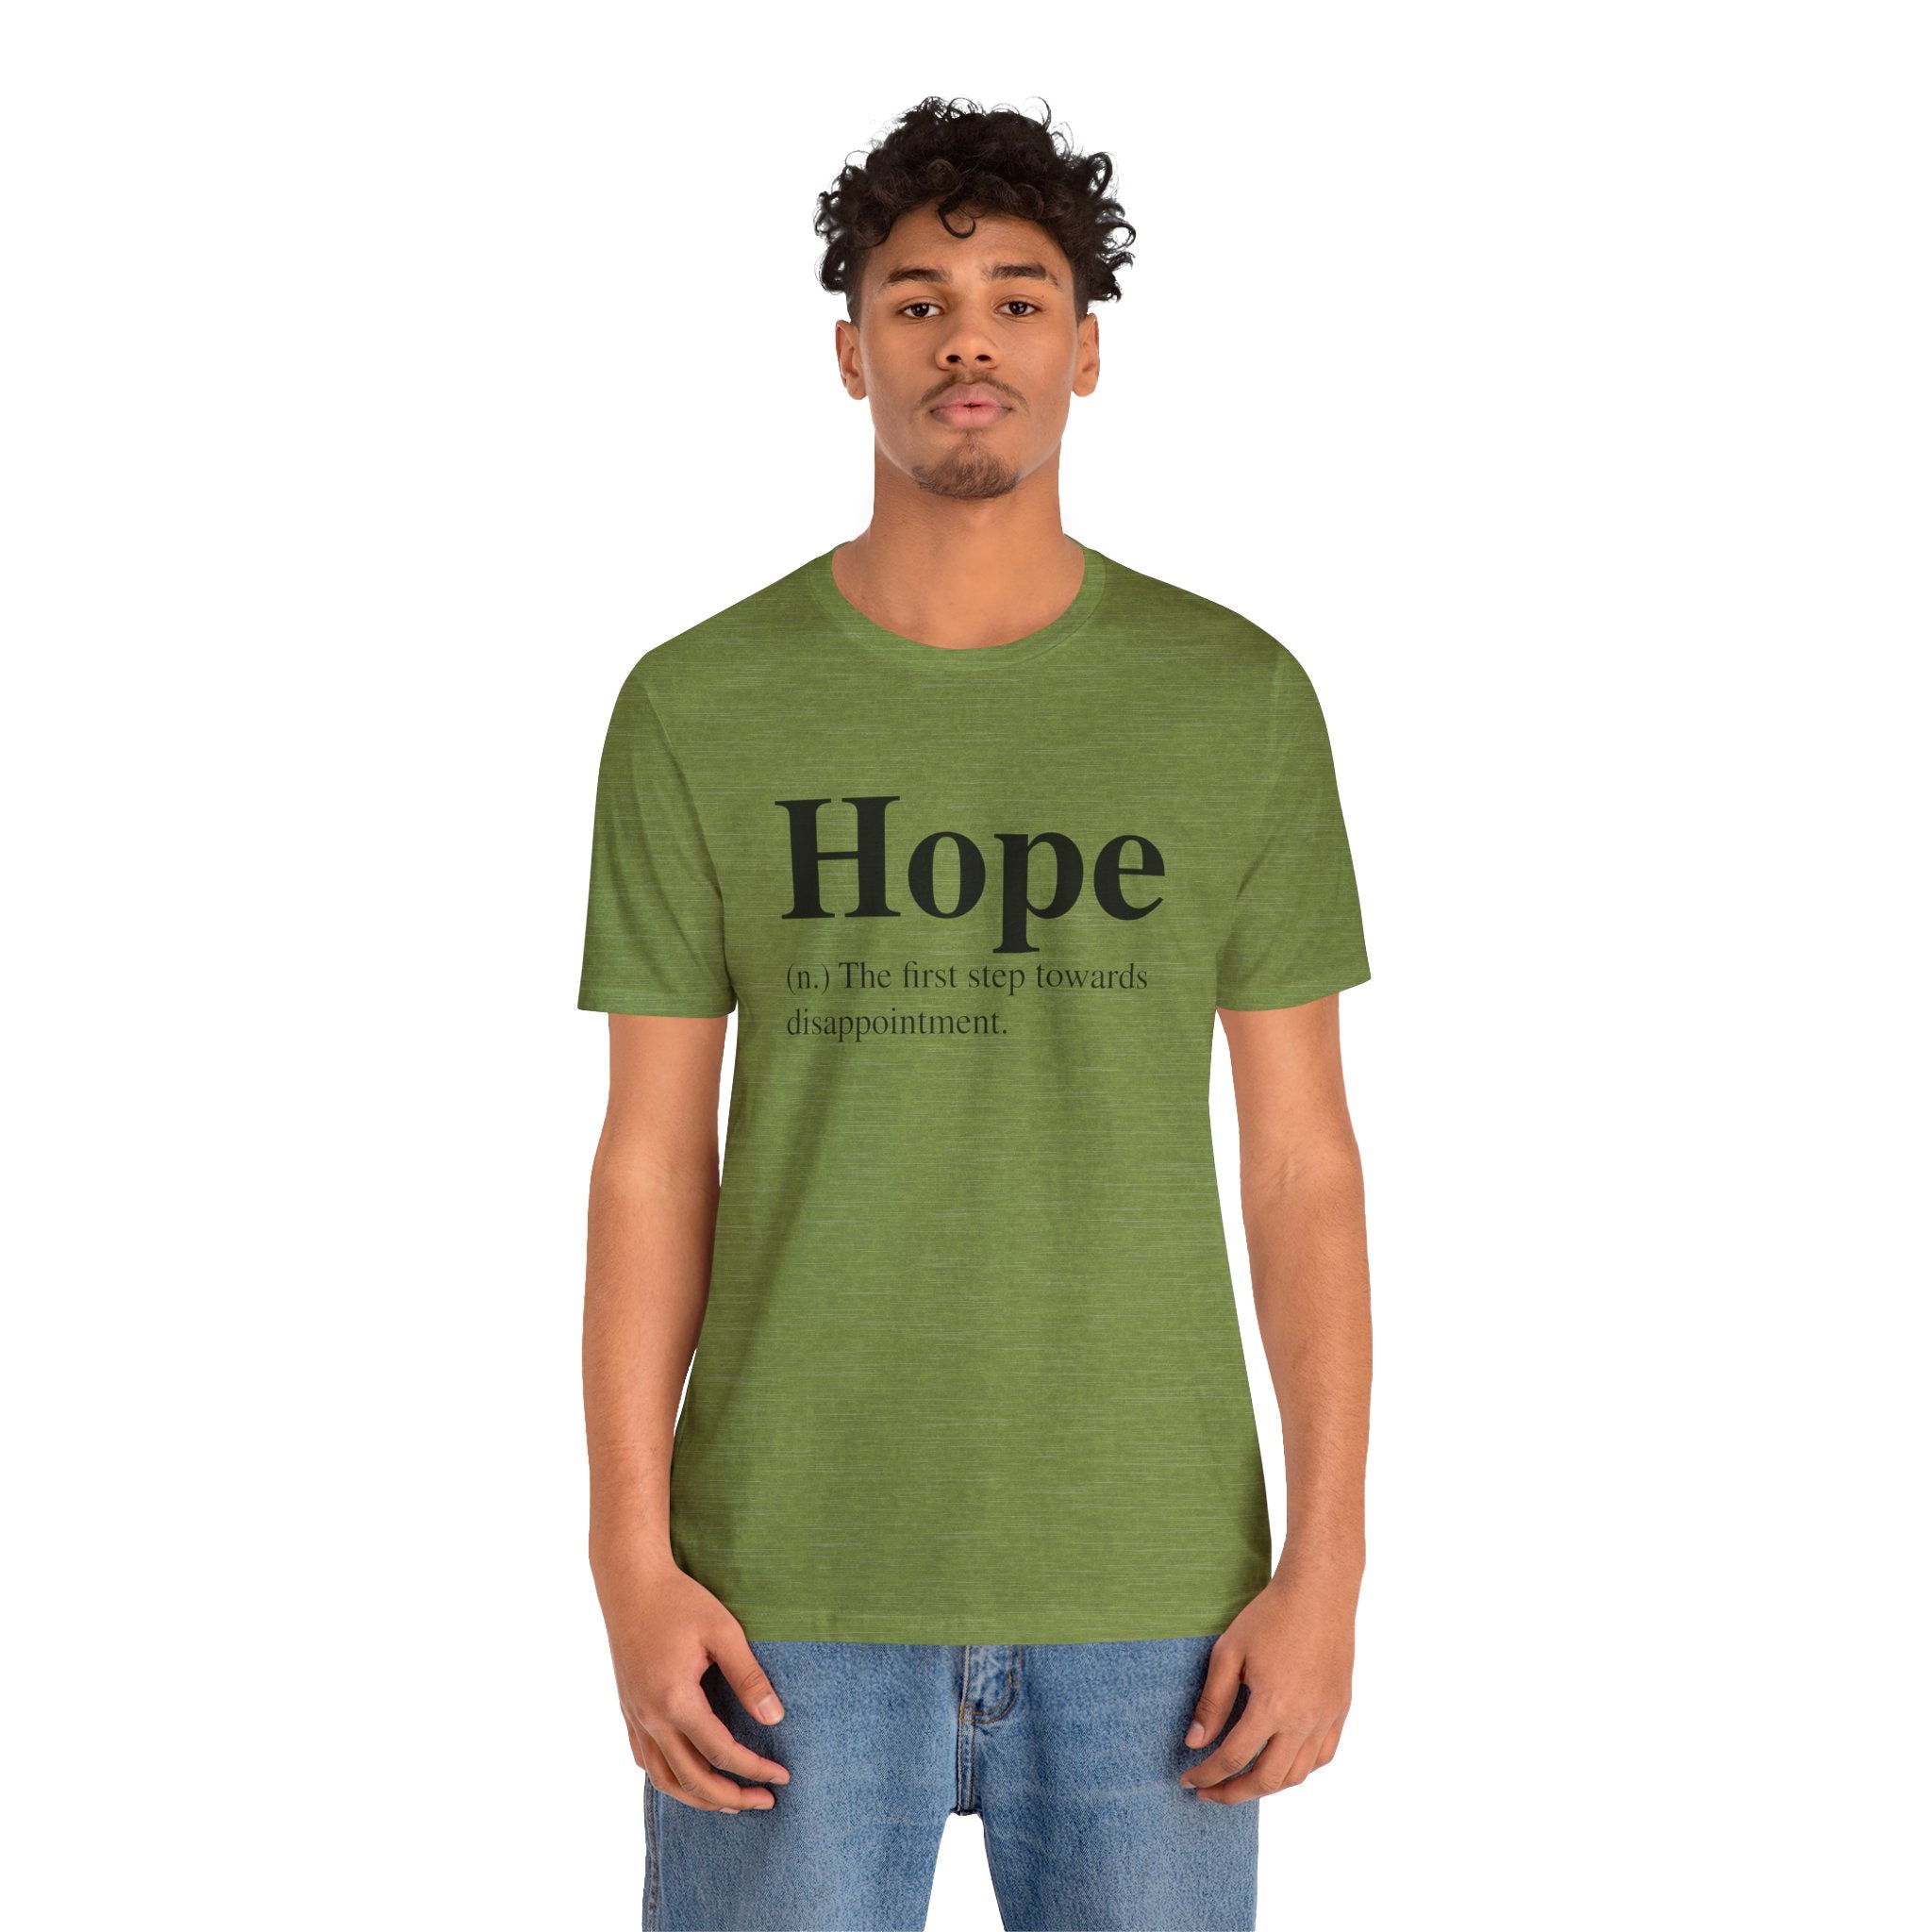 Man in a green unisex "Hope T-Shirt" with the word "hope" and a cynical definition printed on it, paired with blue jeans, standing isolated against a white background.